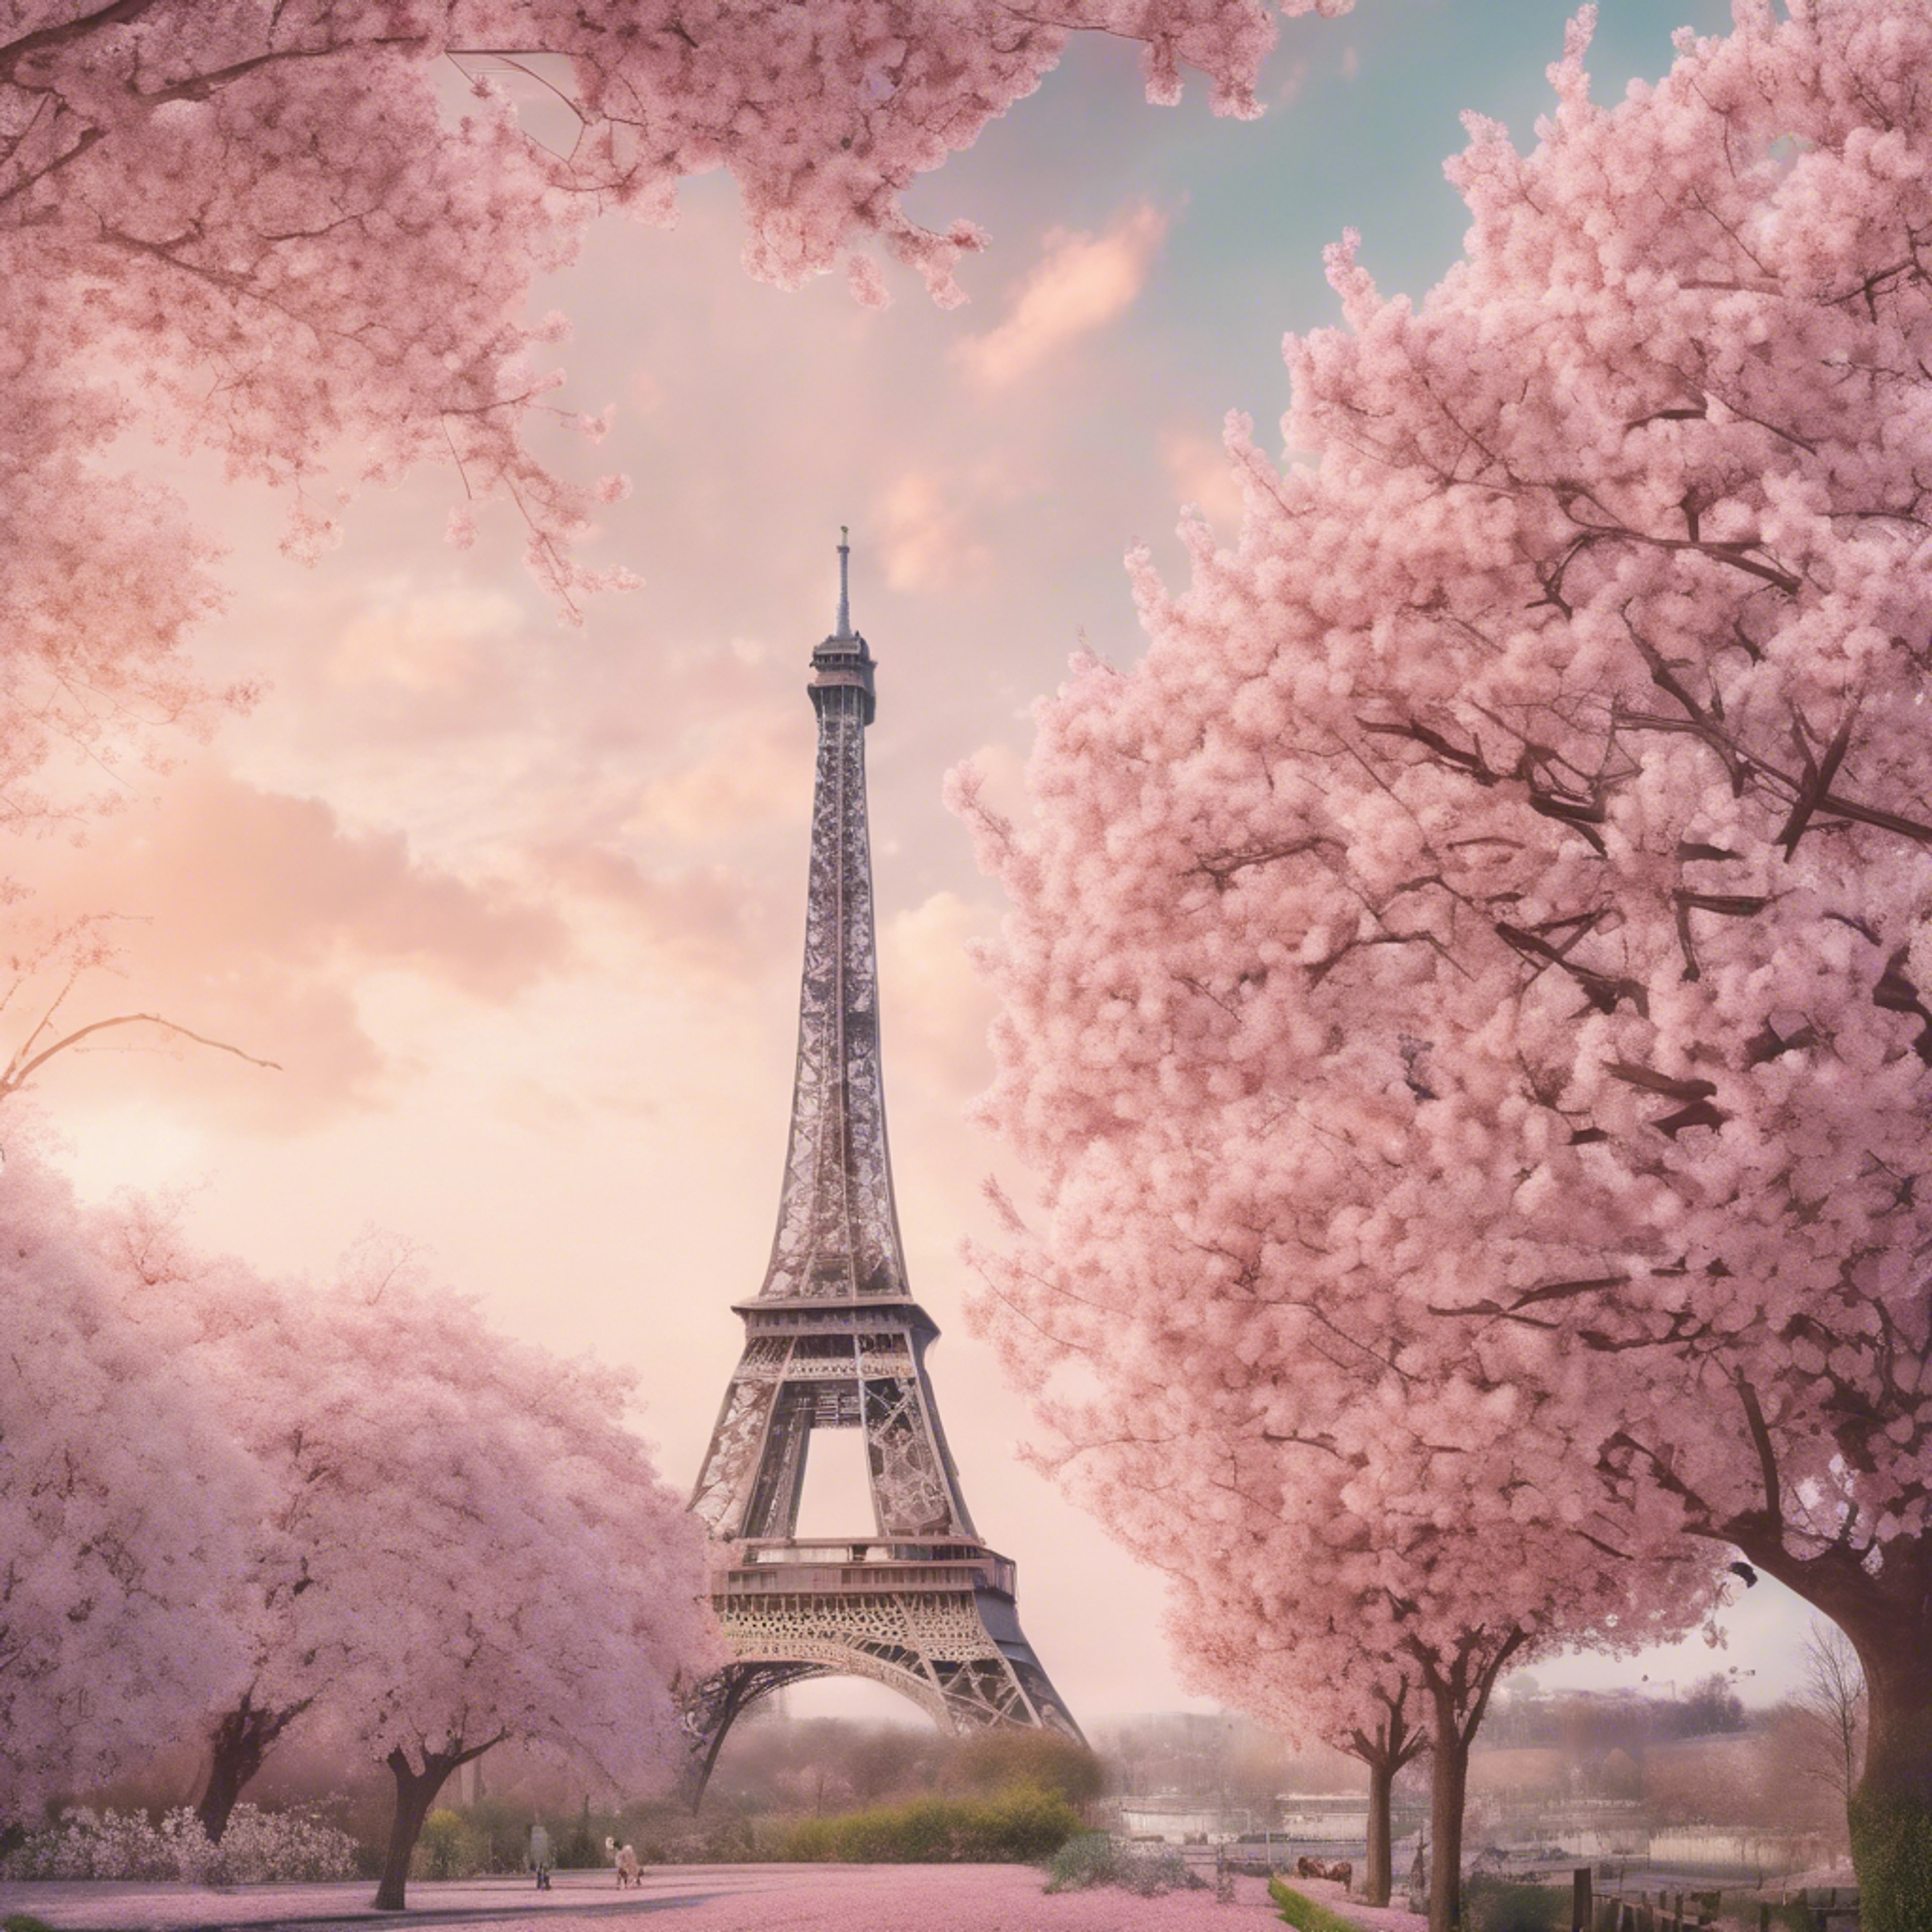 A dreamy pastel artwork of the Eiffel Tower enveloped in cherry blossoms during spring. Tapeta[34c320f998cf44e290fc]